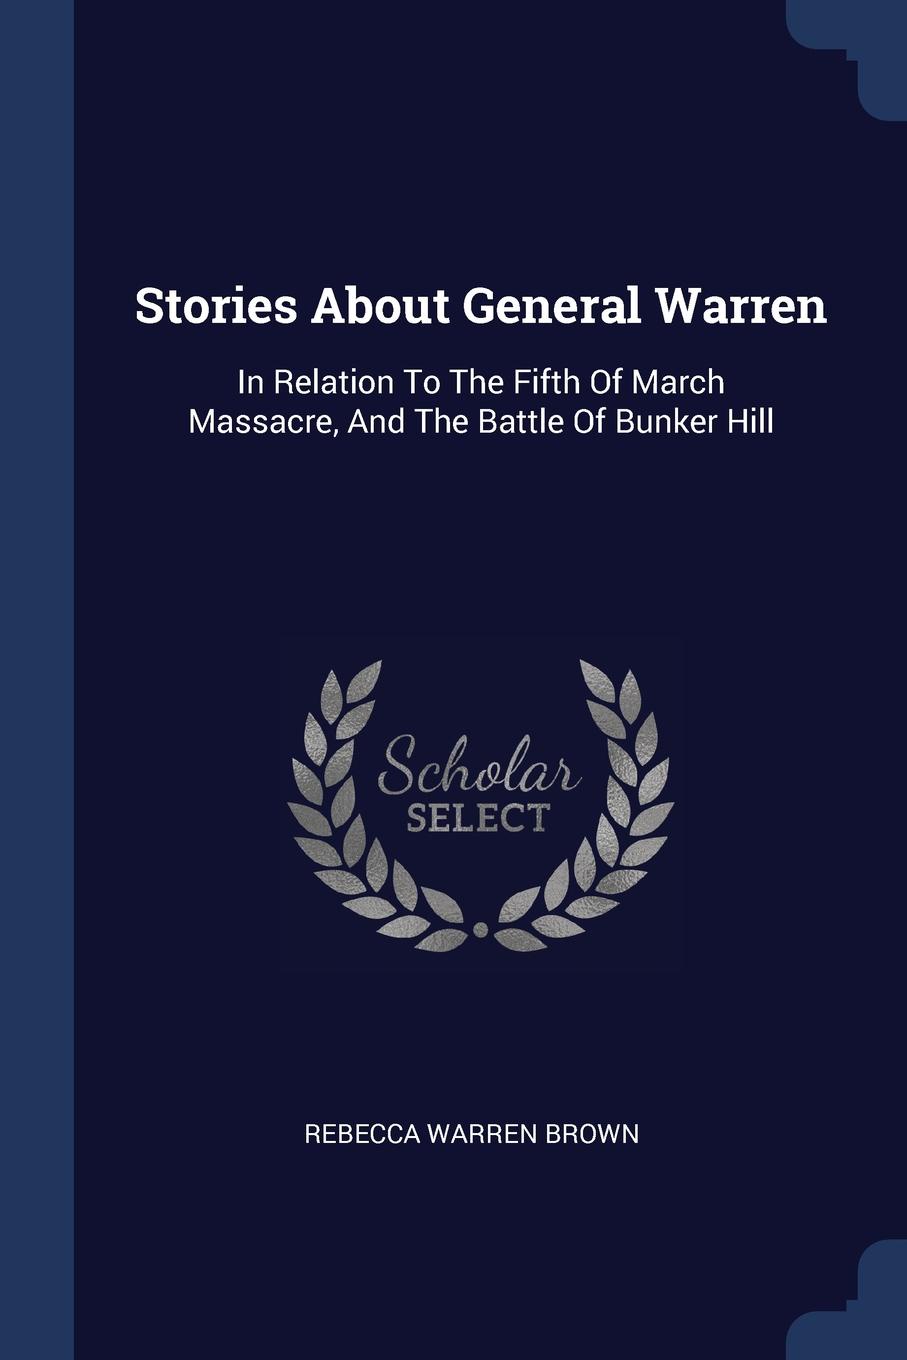 Stories About General Warren. In Relation To The Fifth Of March Massacre, And The Battle Of Bunker Hill